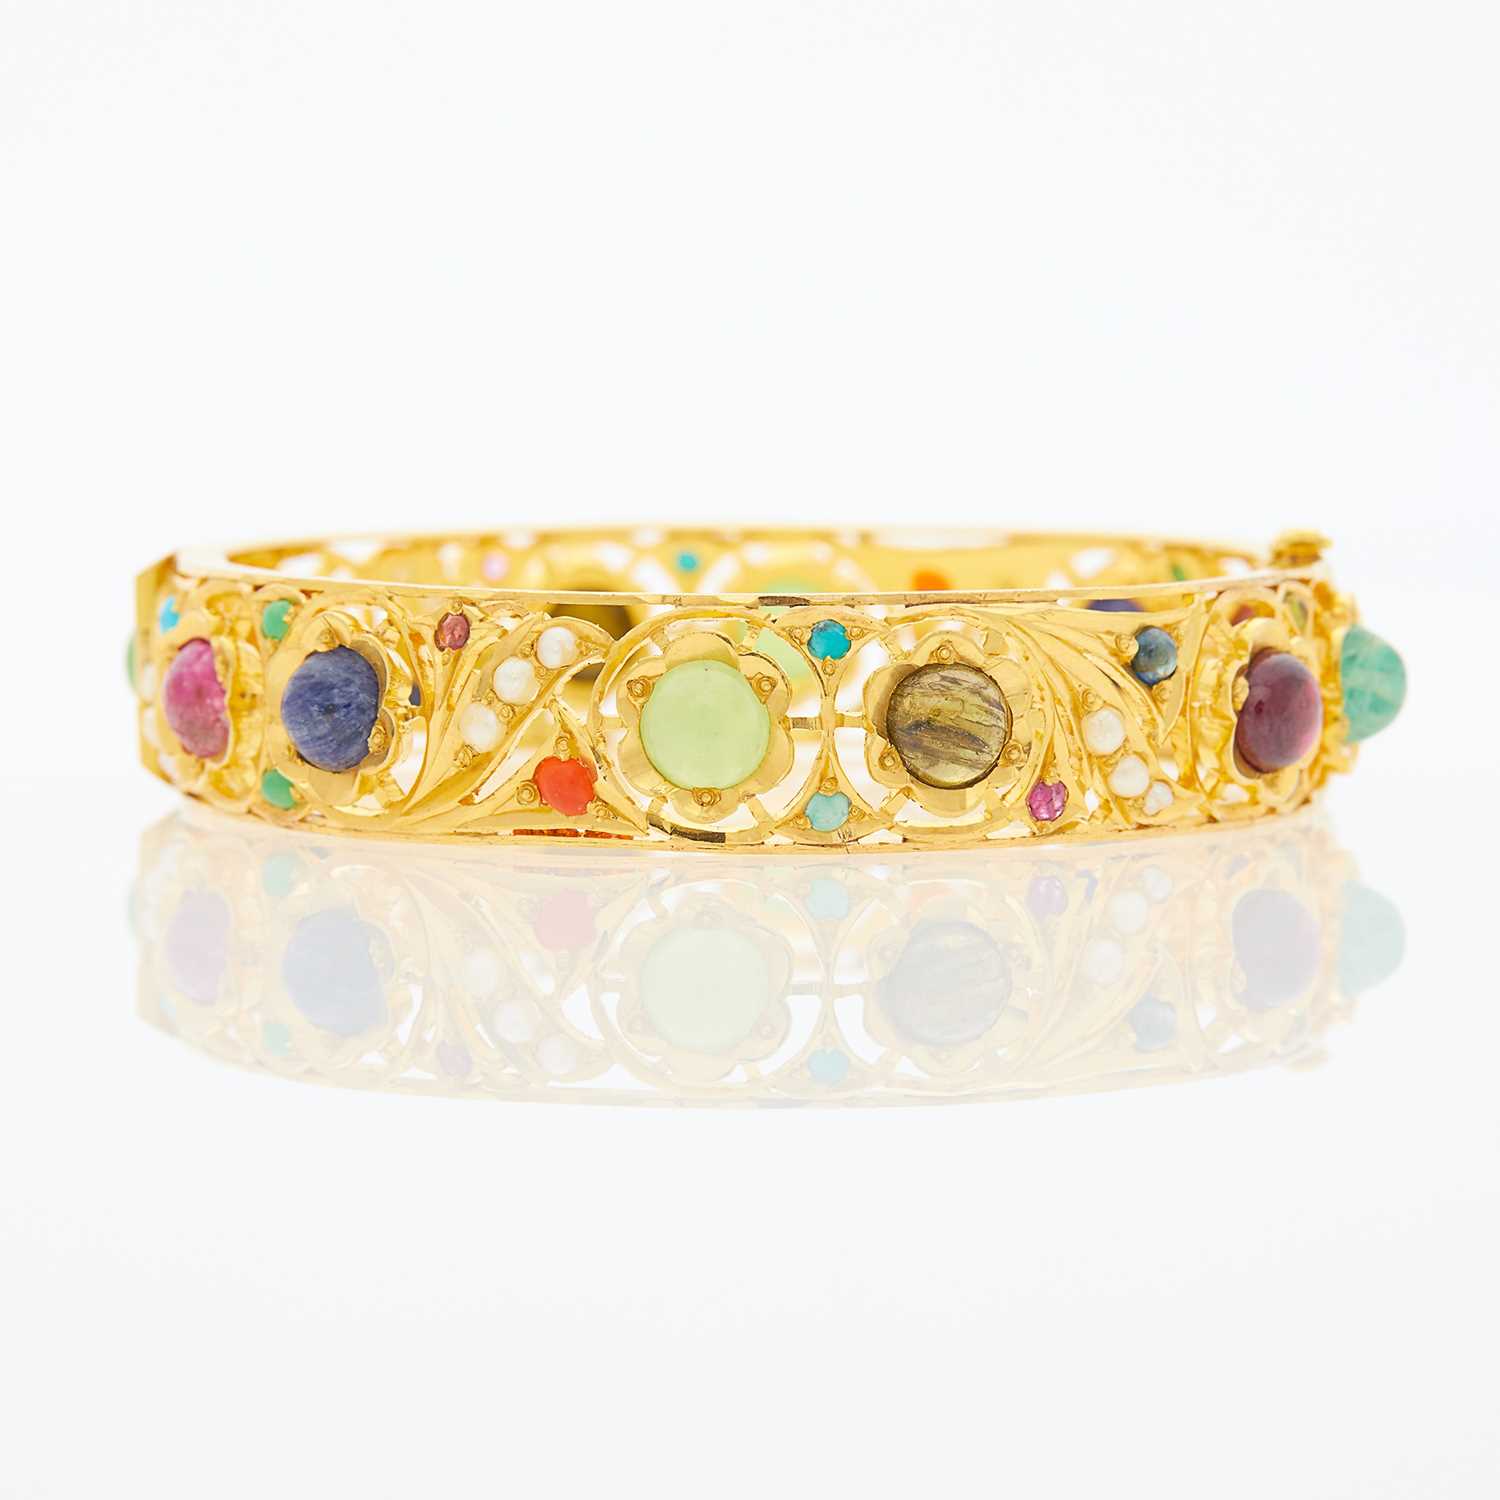 Lot 1053 - Gold, Cabochon Colored Stone and Split Pearl Bangle Bracelet